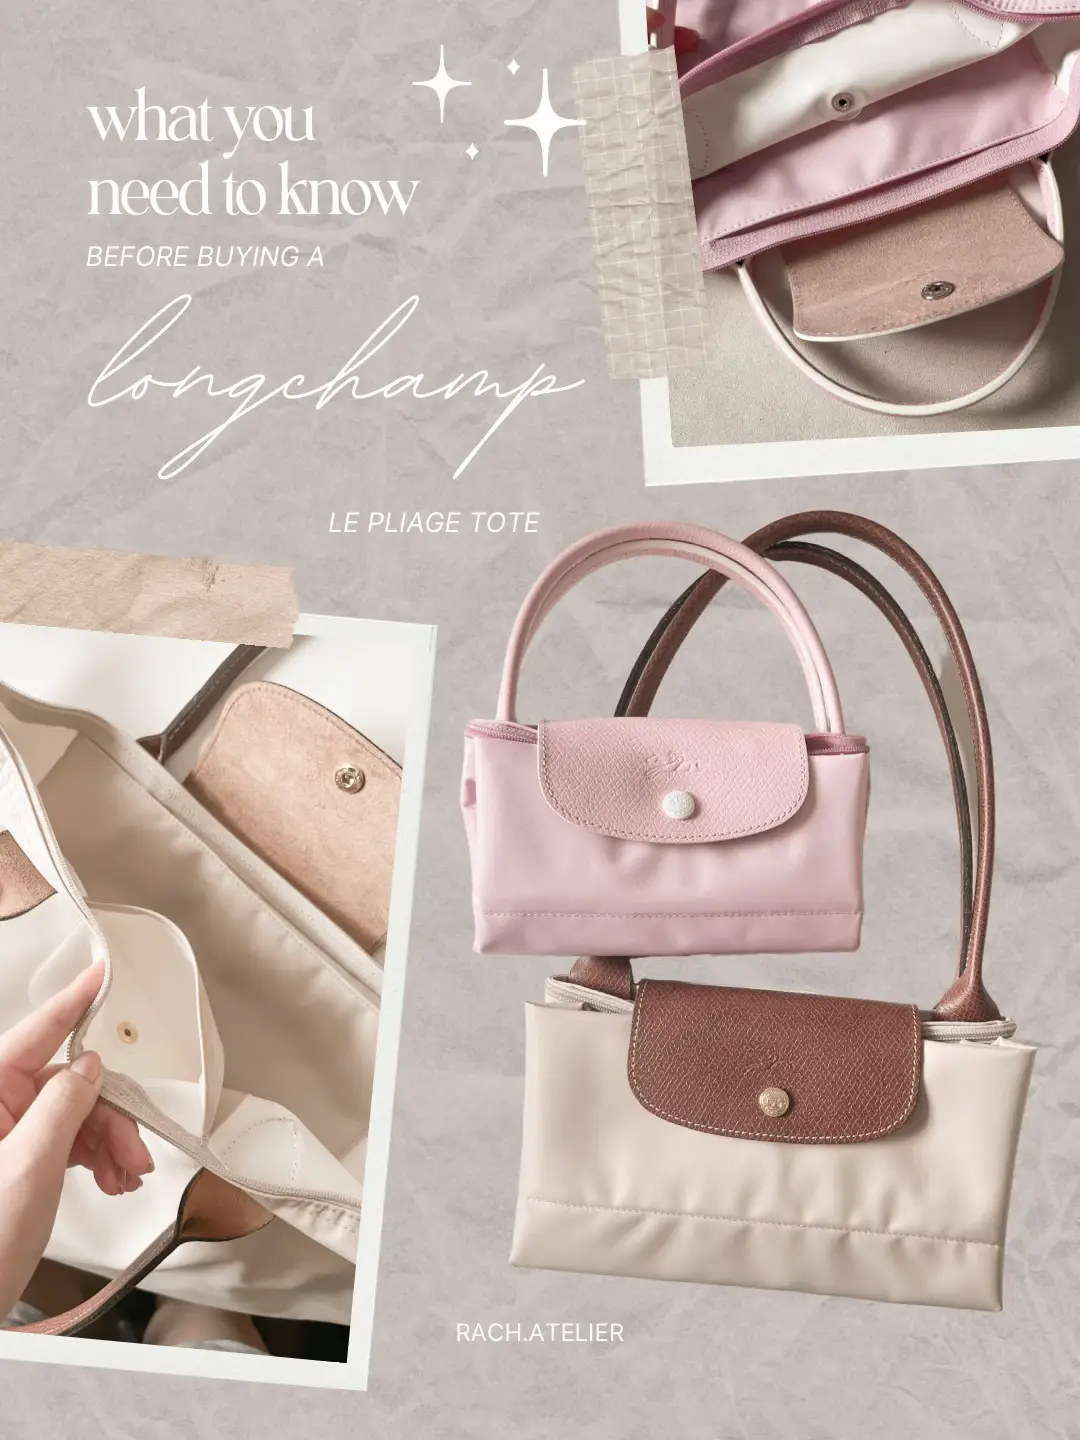 what you should know before getting a longchamp ☁️'s images(0)